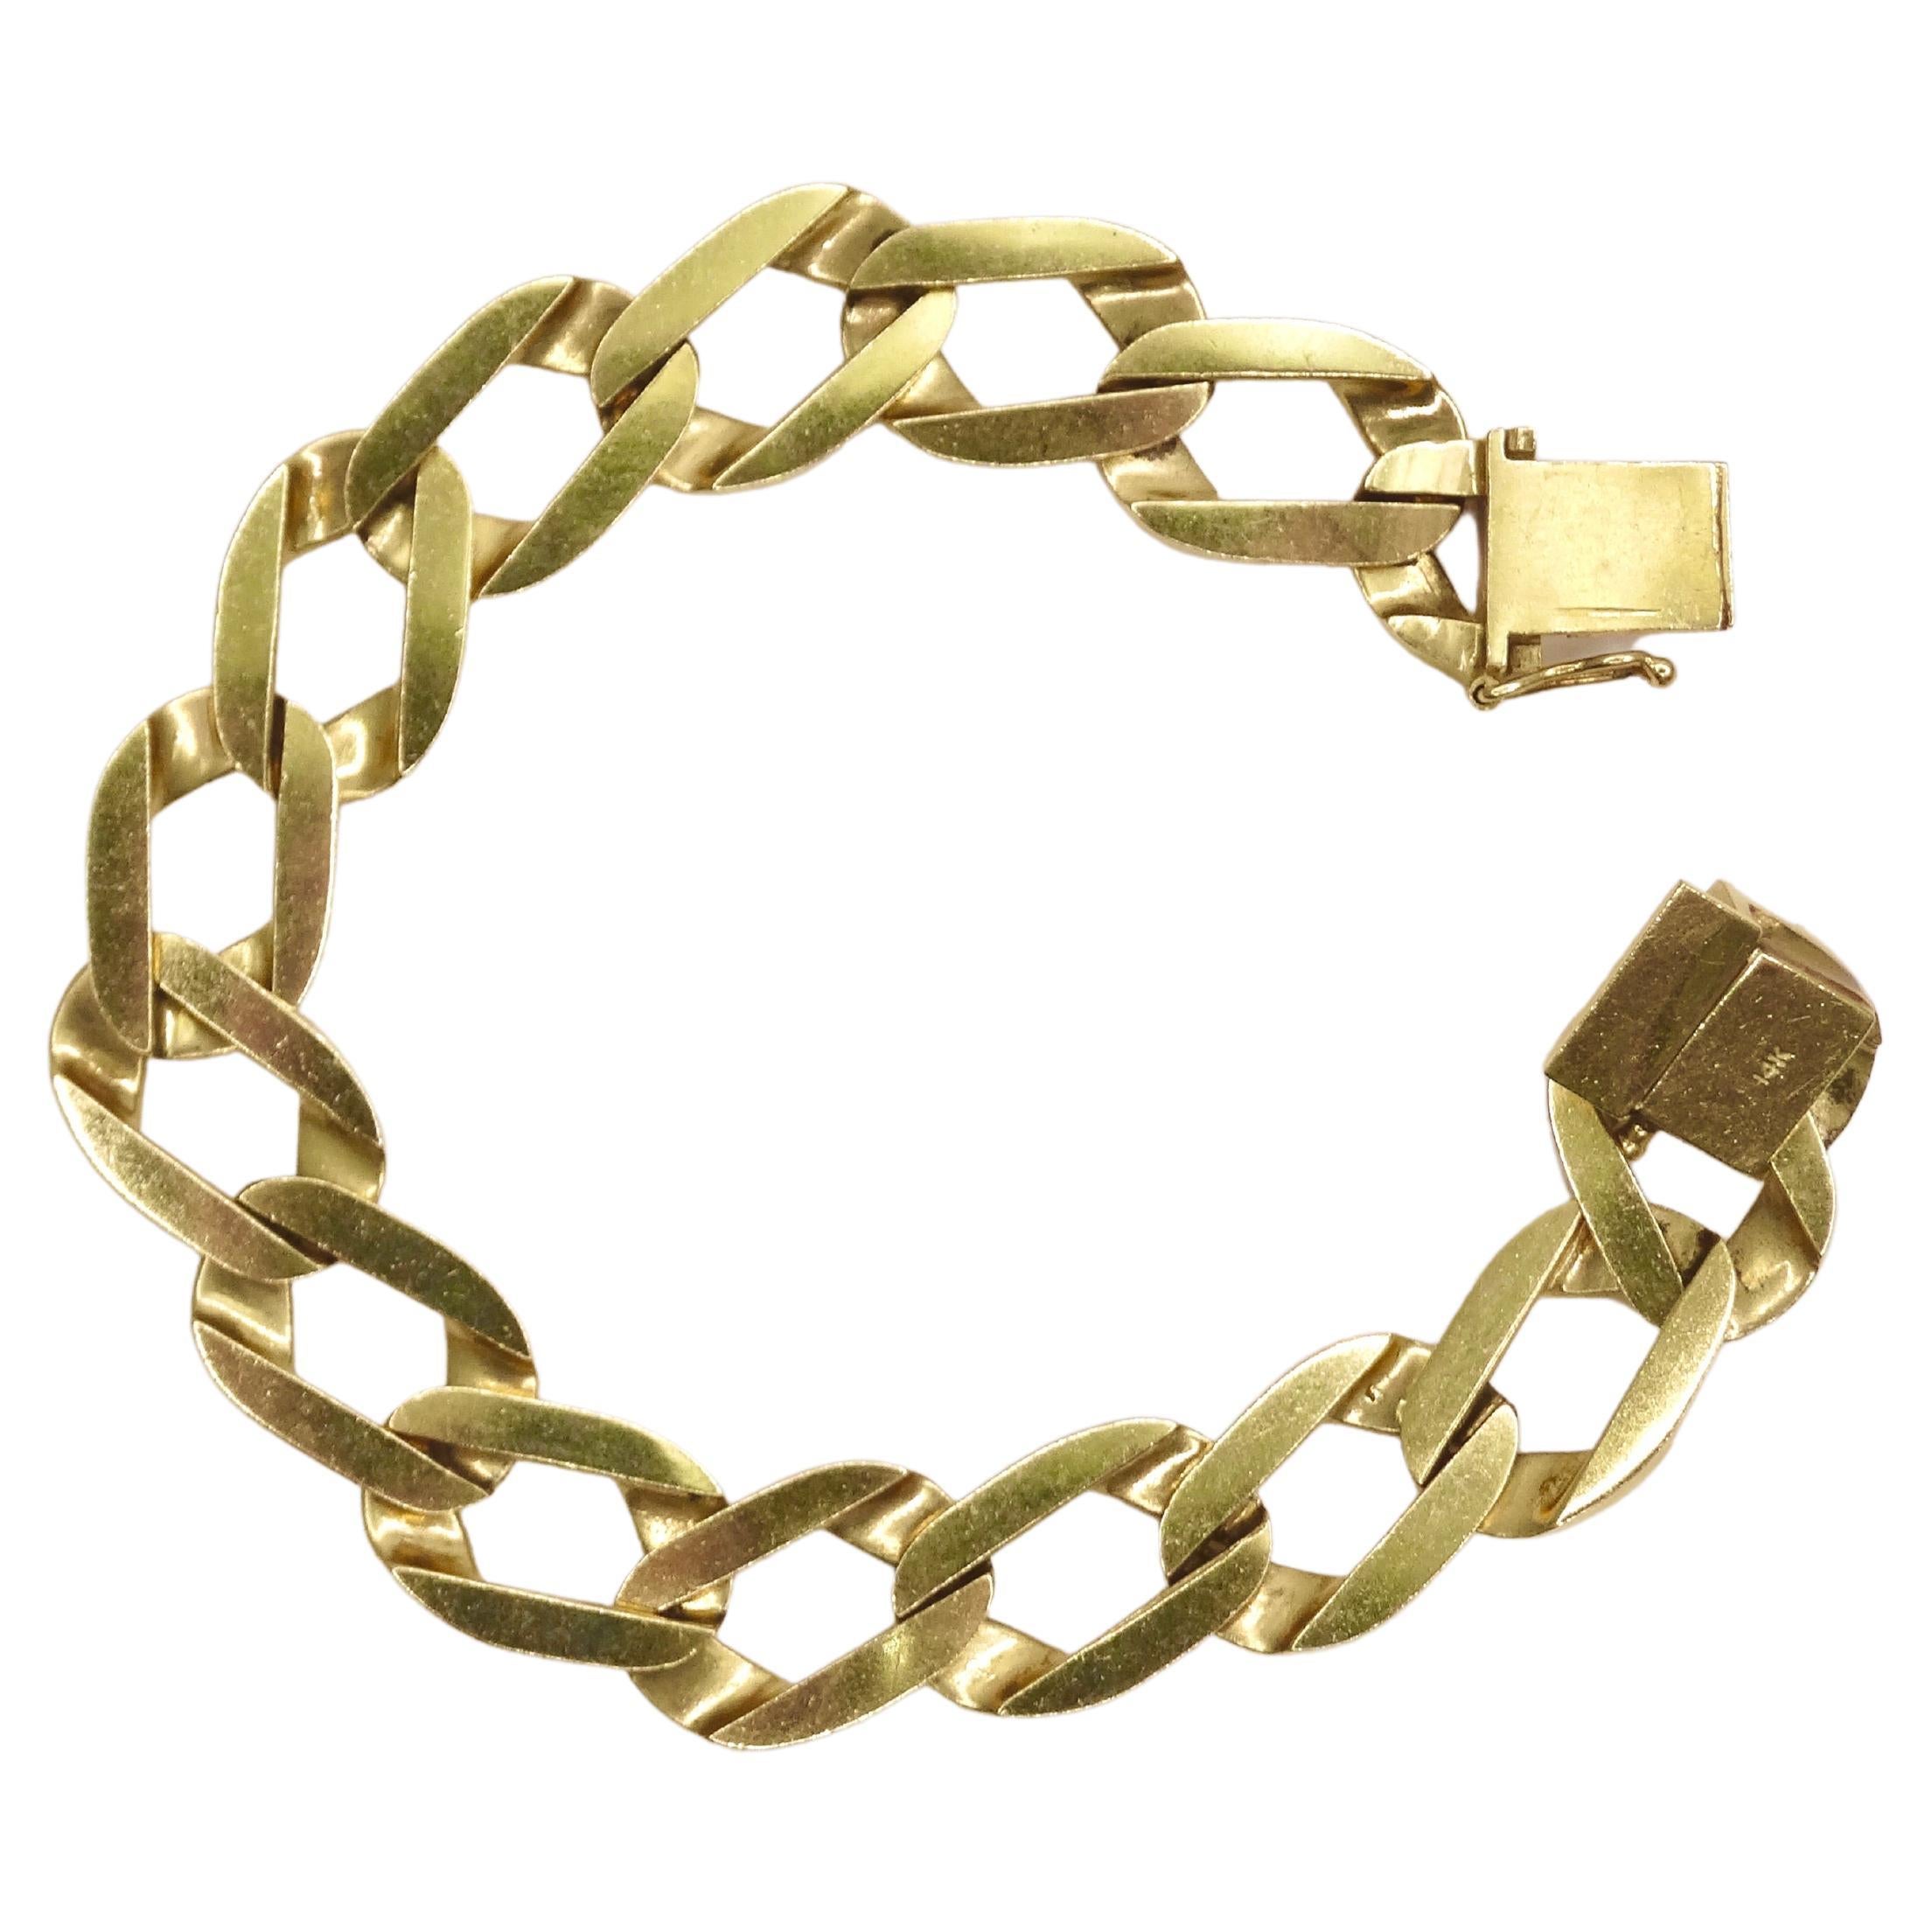 A heavy Miami Cuban Link Bracelet, large gold links will adorn your wrist and give your whole look an edge circa 1980s. Made of 14k gold that will last you a lifetime. Wear this with a graphic Gianni Versace top and a Gucci pool slides. Made in